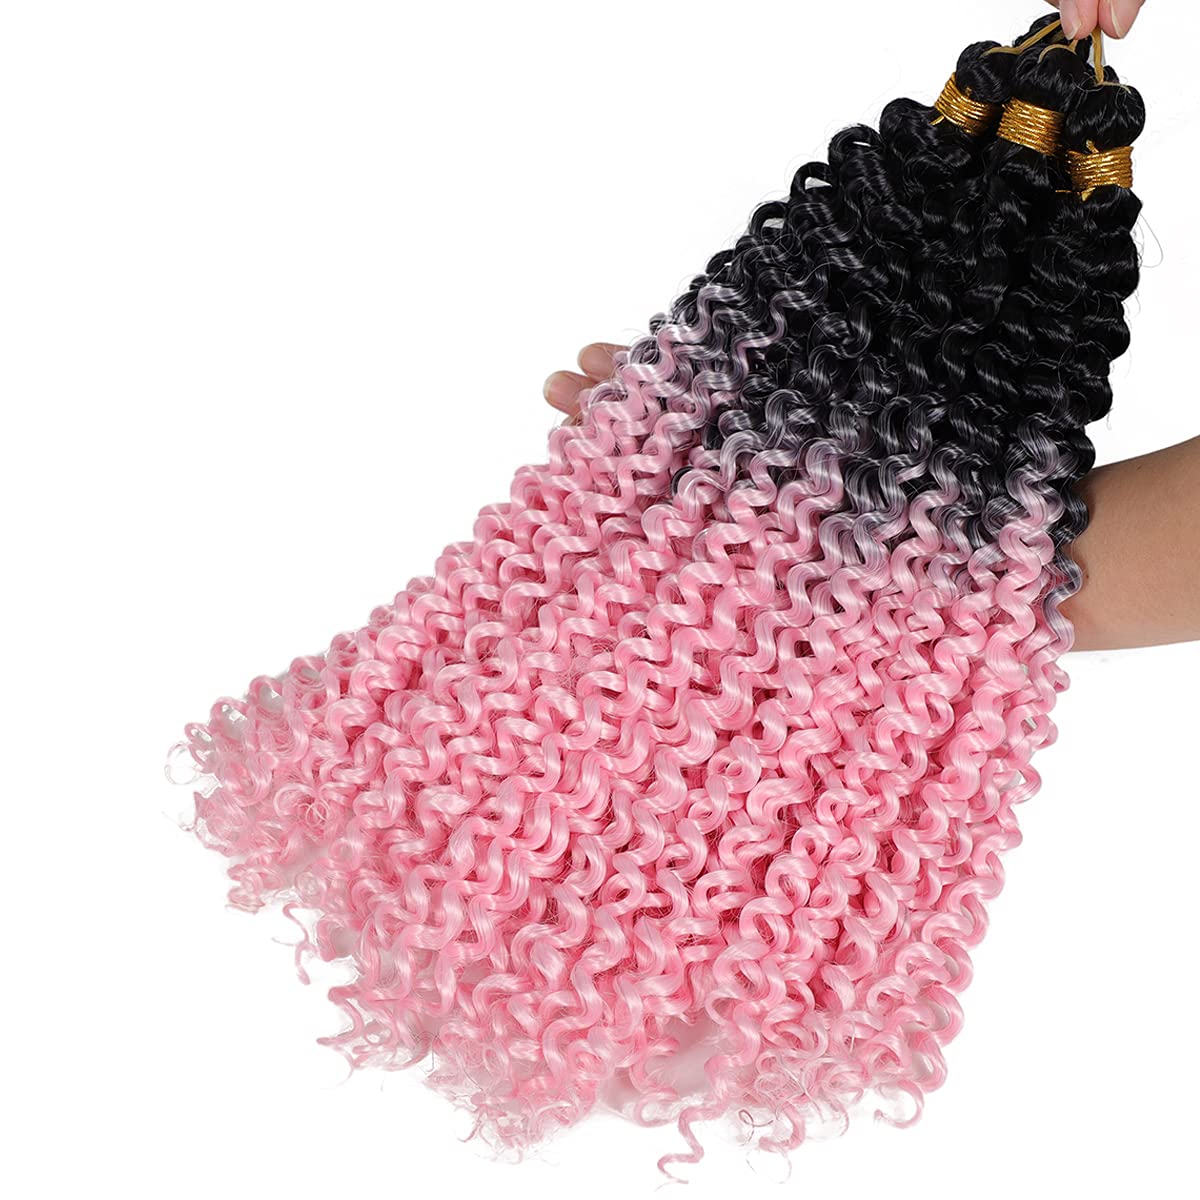 5Pack Marlybob Water Wave Crochet Curly Hair 100g/pack Jerry Curly Crochet  Braid Hair Bundle Ombre Pink Curly Crochet Braiding Hair for Black